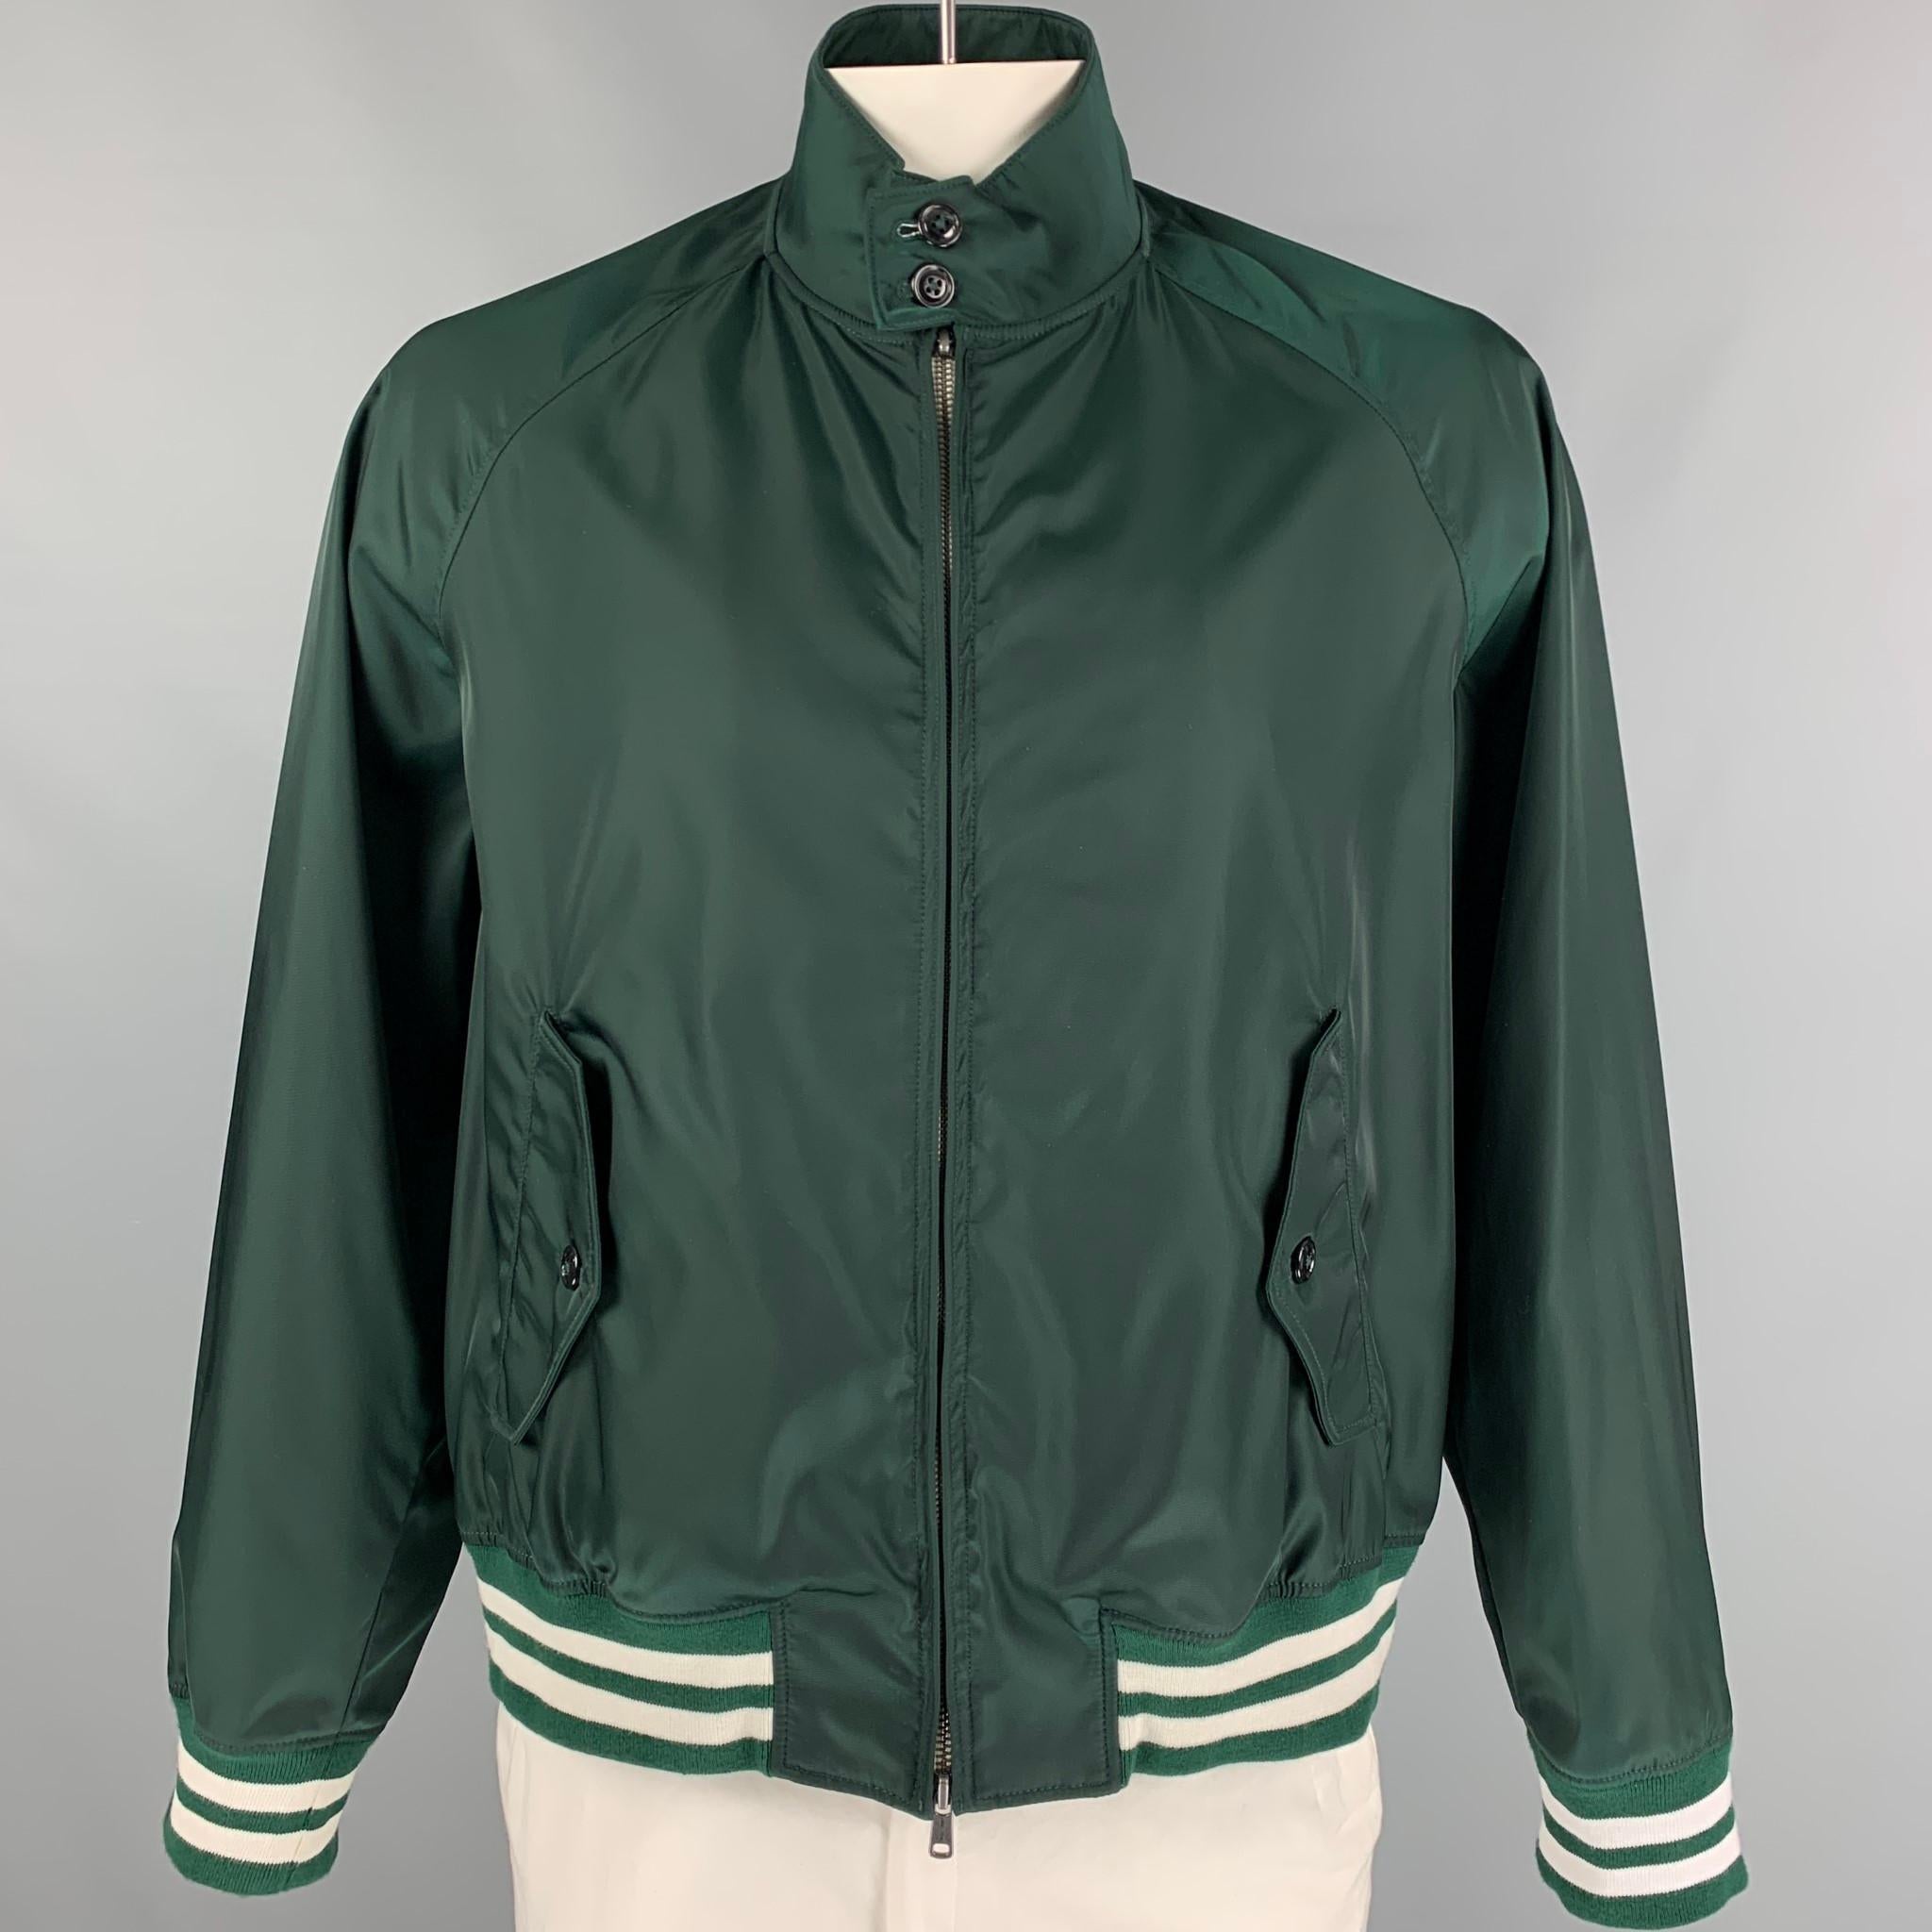 TODD SNYDER jacket comes in a green polyamide featuring a buttoned collar, striped trim, flap pockets, and a zip up closure. Made in Portugal.

Very Good Pre-Owned Condition.
Marked: XXL

Measurements:

Shoulder: 16.5 in.
Chest: 52 in.
Sleeve: 28